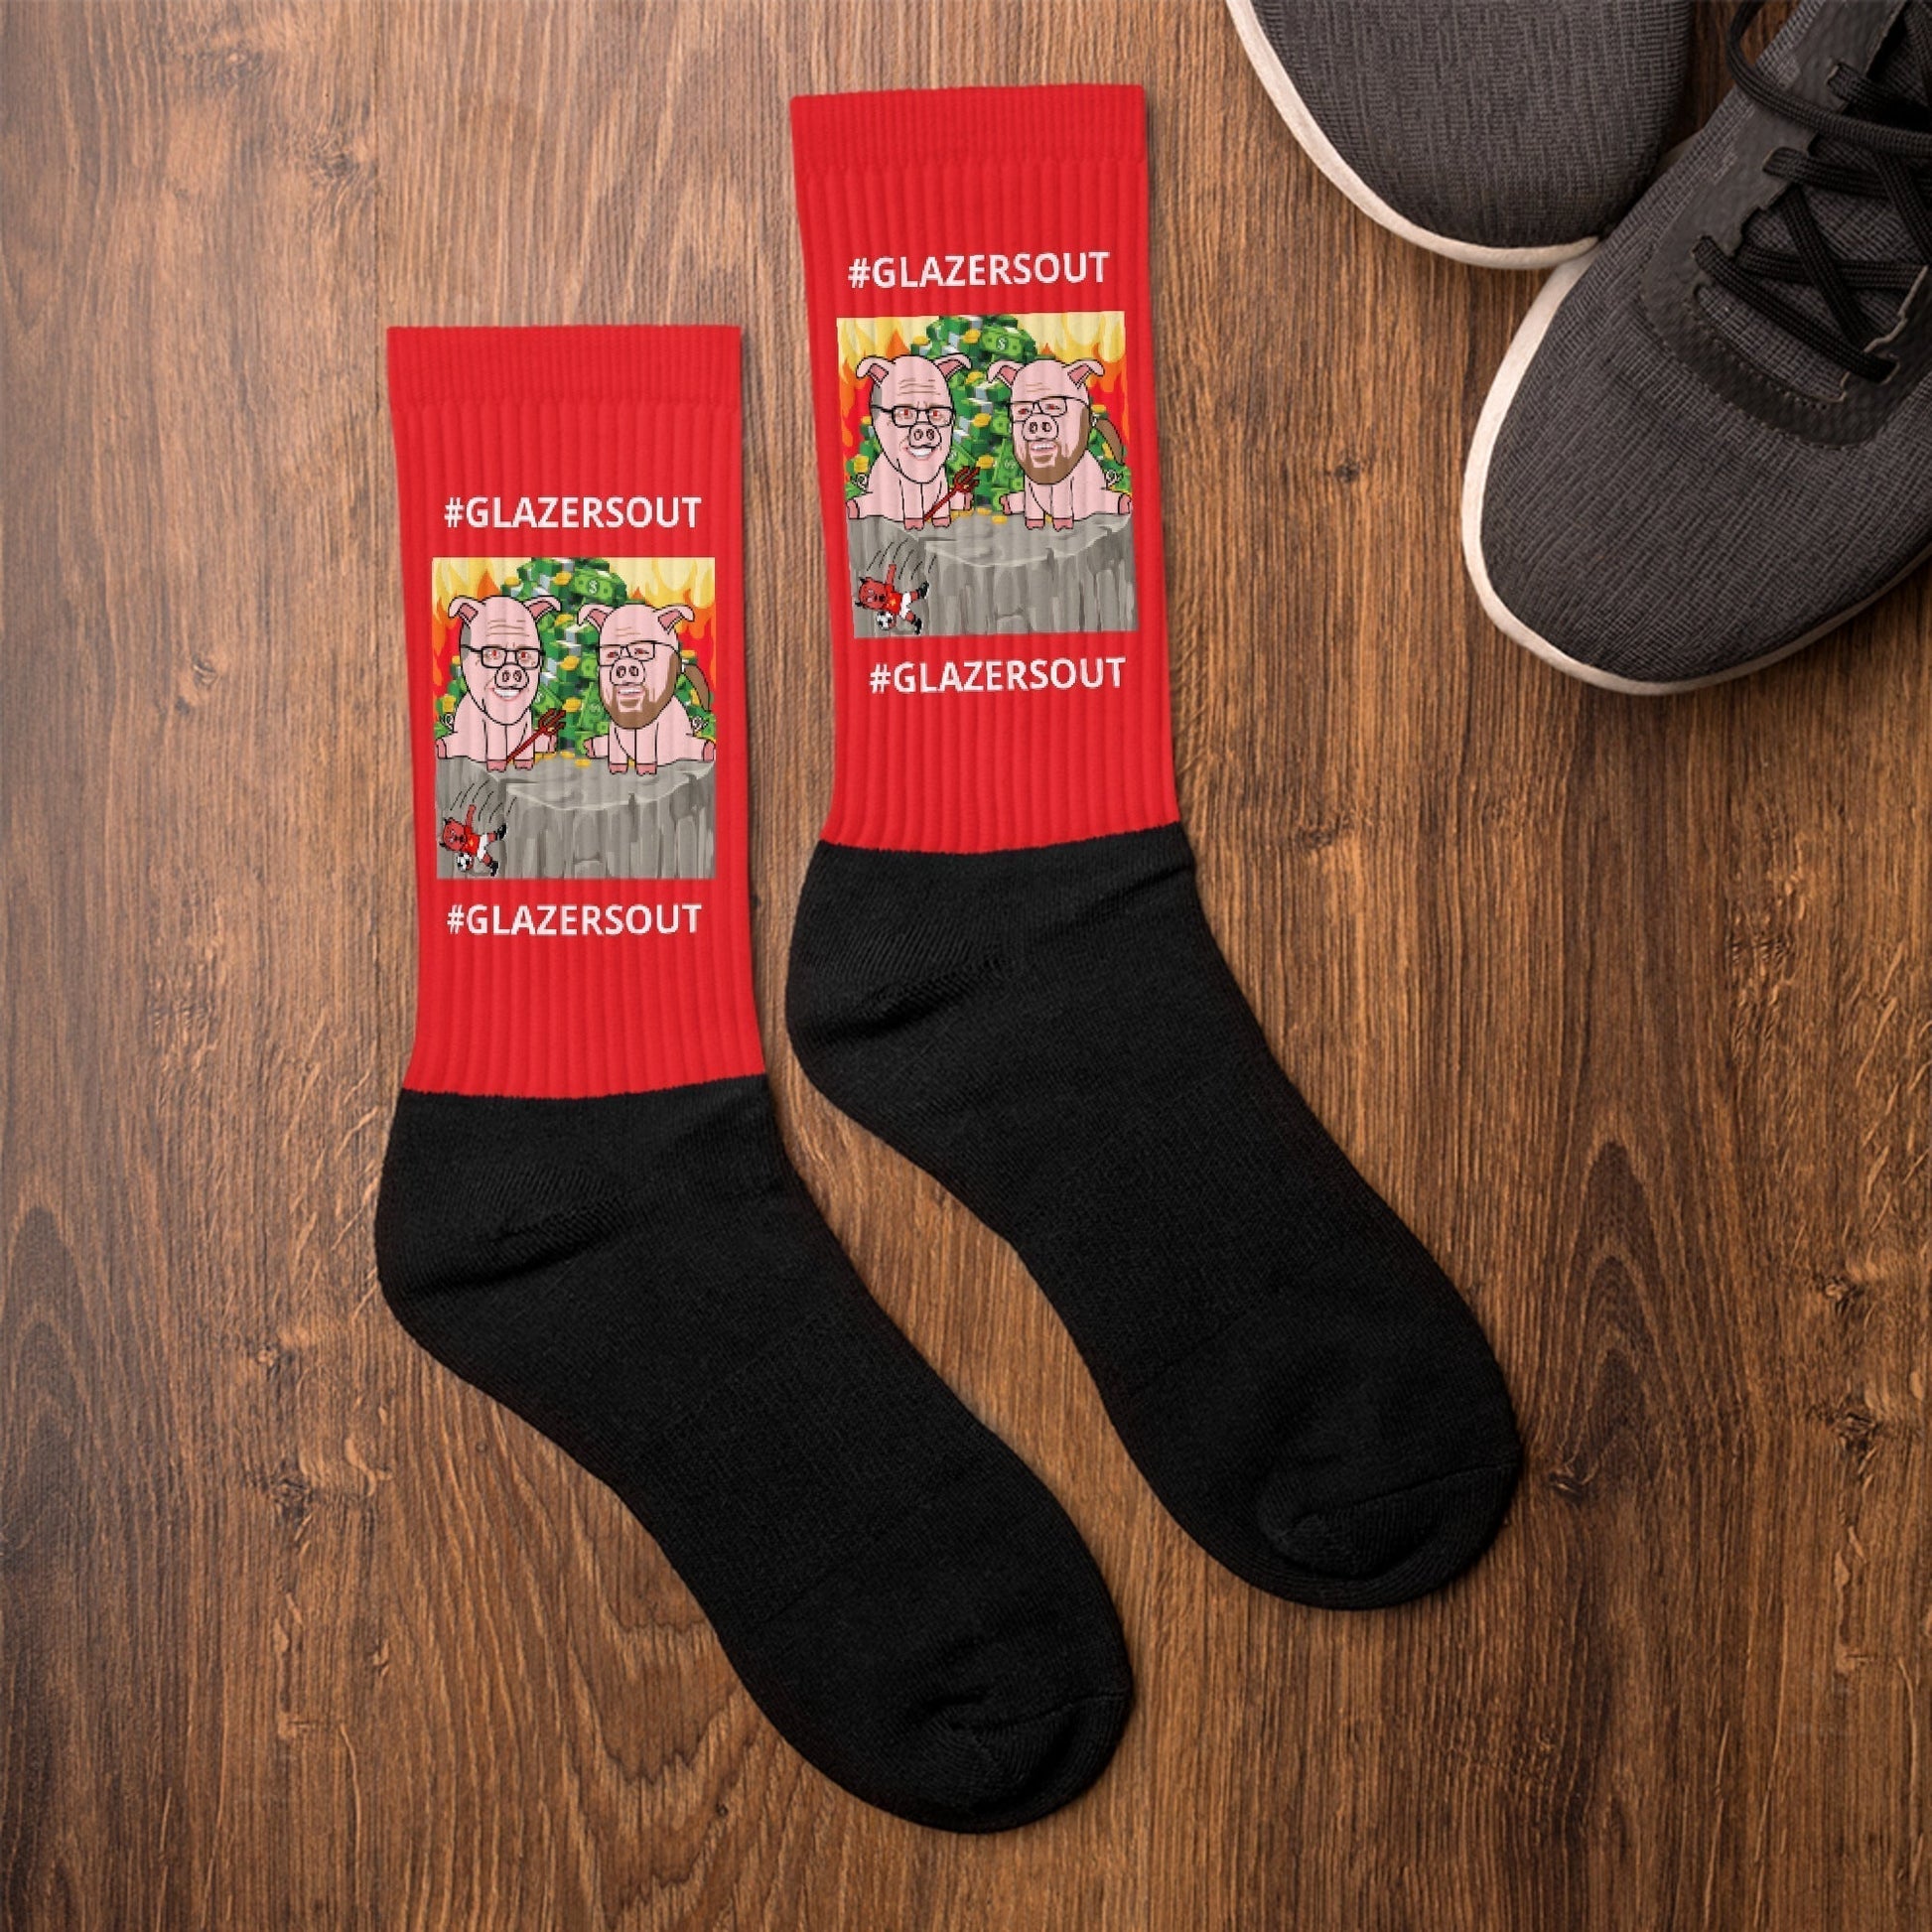 Glazers Out Manchester United Socks Next Cult Brand Football, GlazersOut, Manchester United